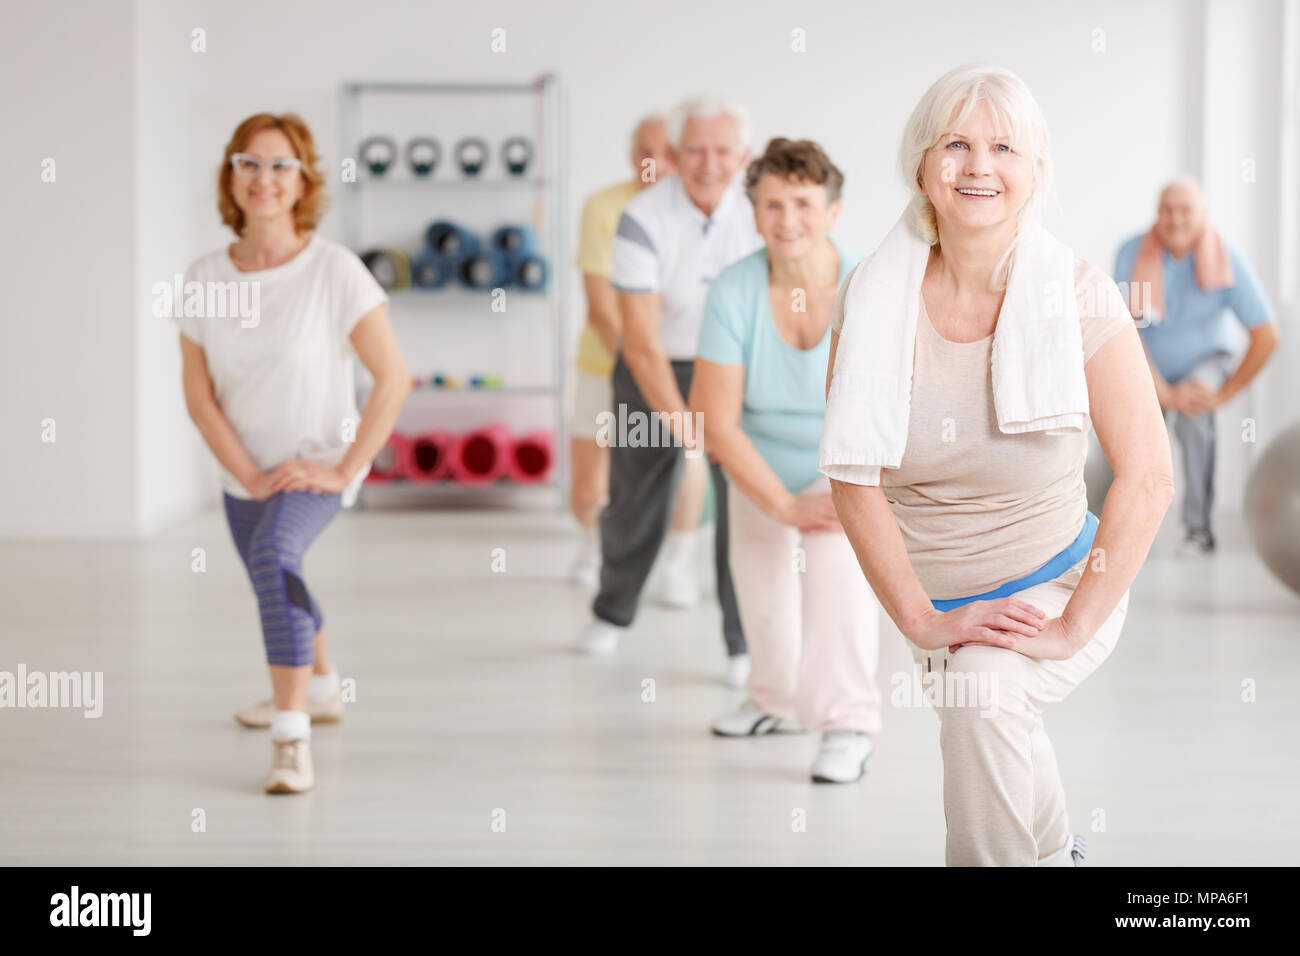 https://c8.alamy.com/comp/MPA6F1/elderly-people-exercising-in-a-group-in-fitness-club-MPA6F1.jpg